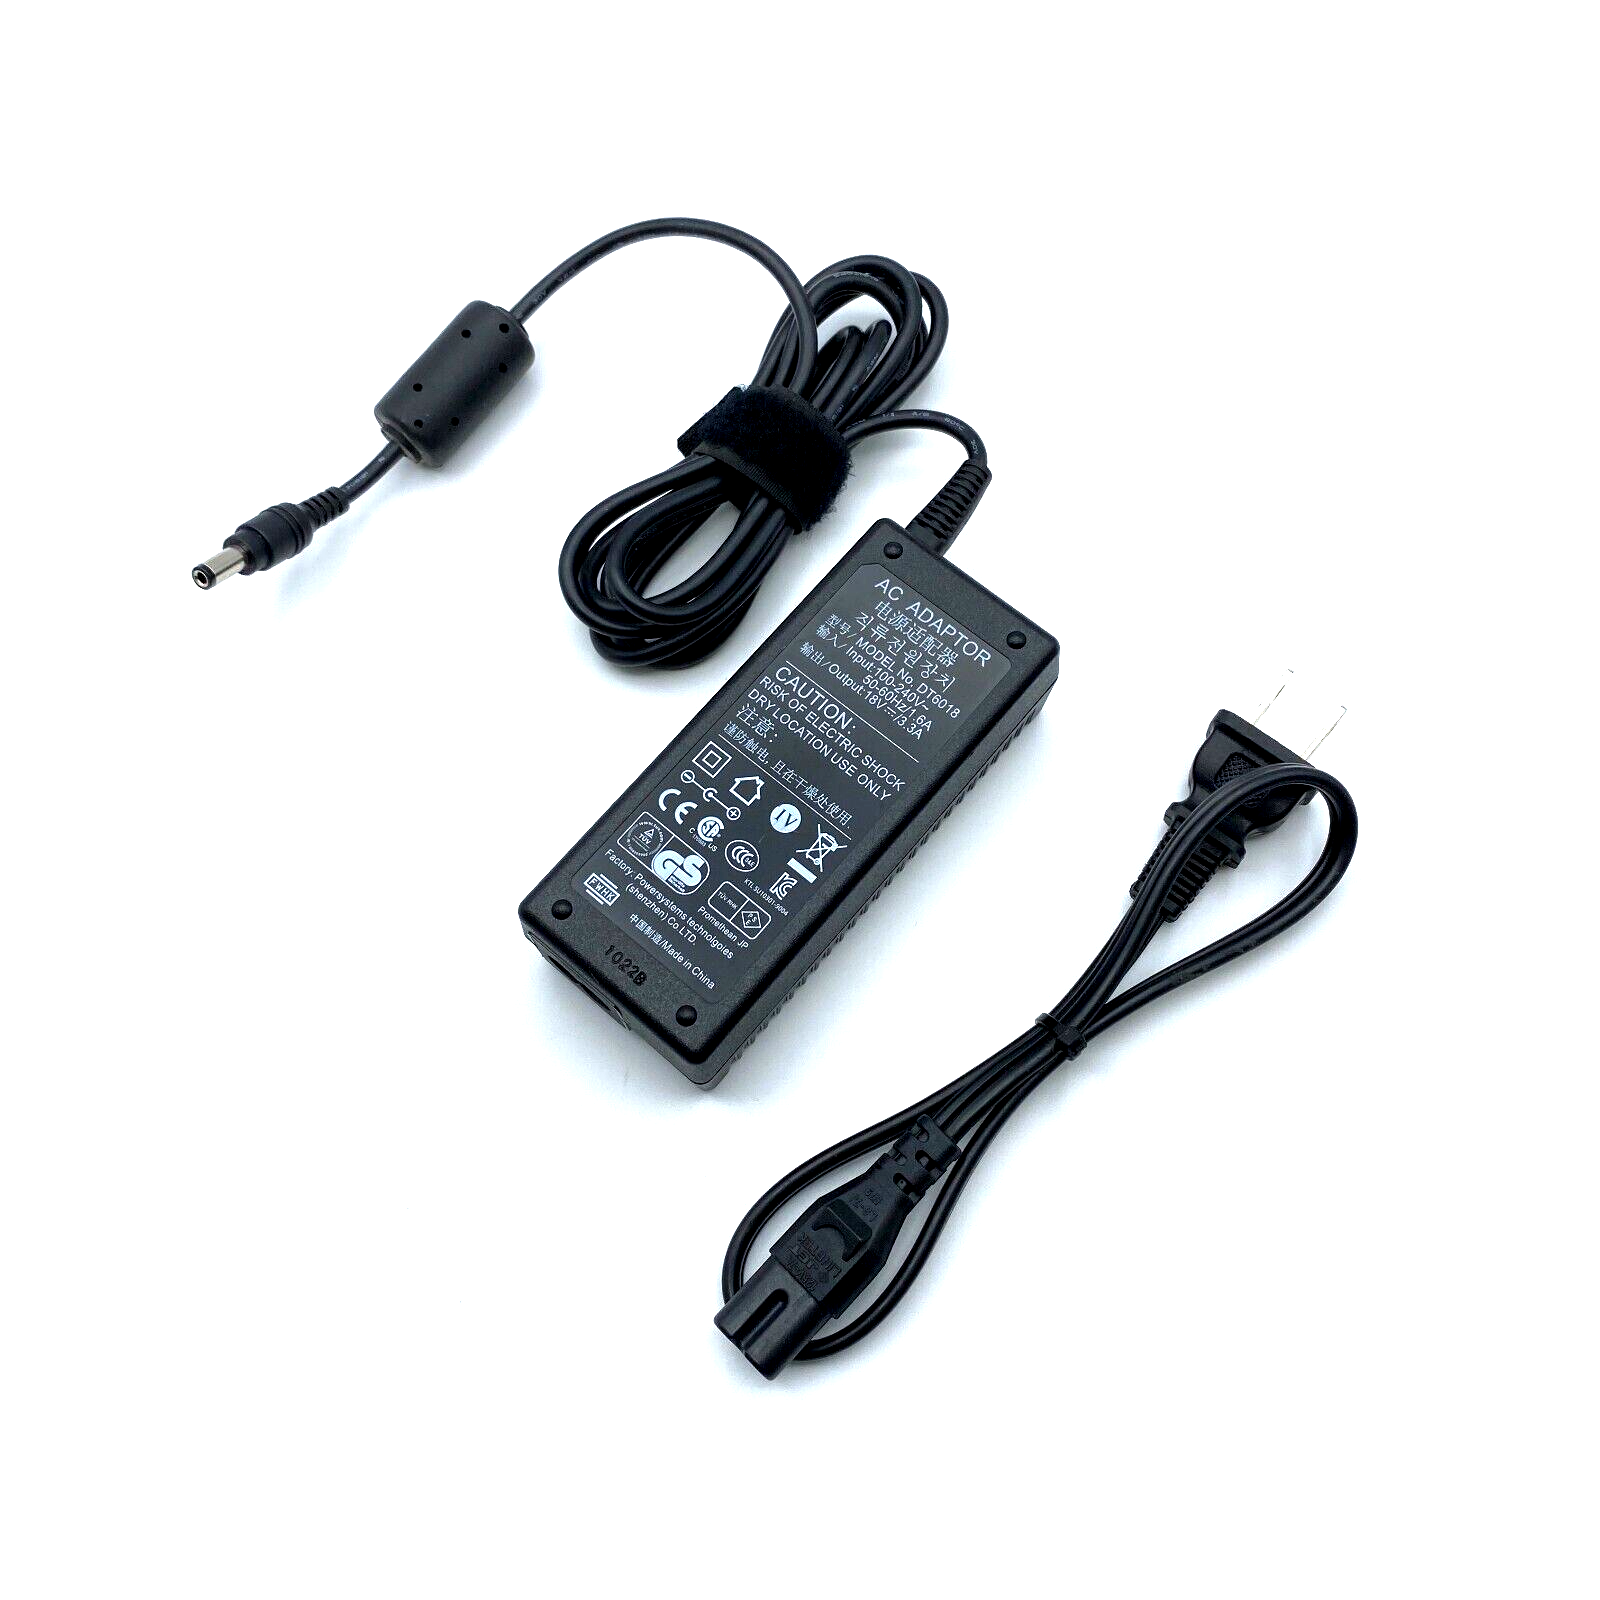 Genuine Promethean DT6018 AC/DC Power Supply Adapter 18V 3.3A 60W OEM w/PC Type AC/DC Adapter Connection Split/Duplicat - Click Image to Close